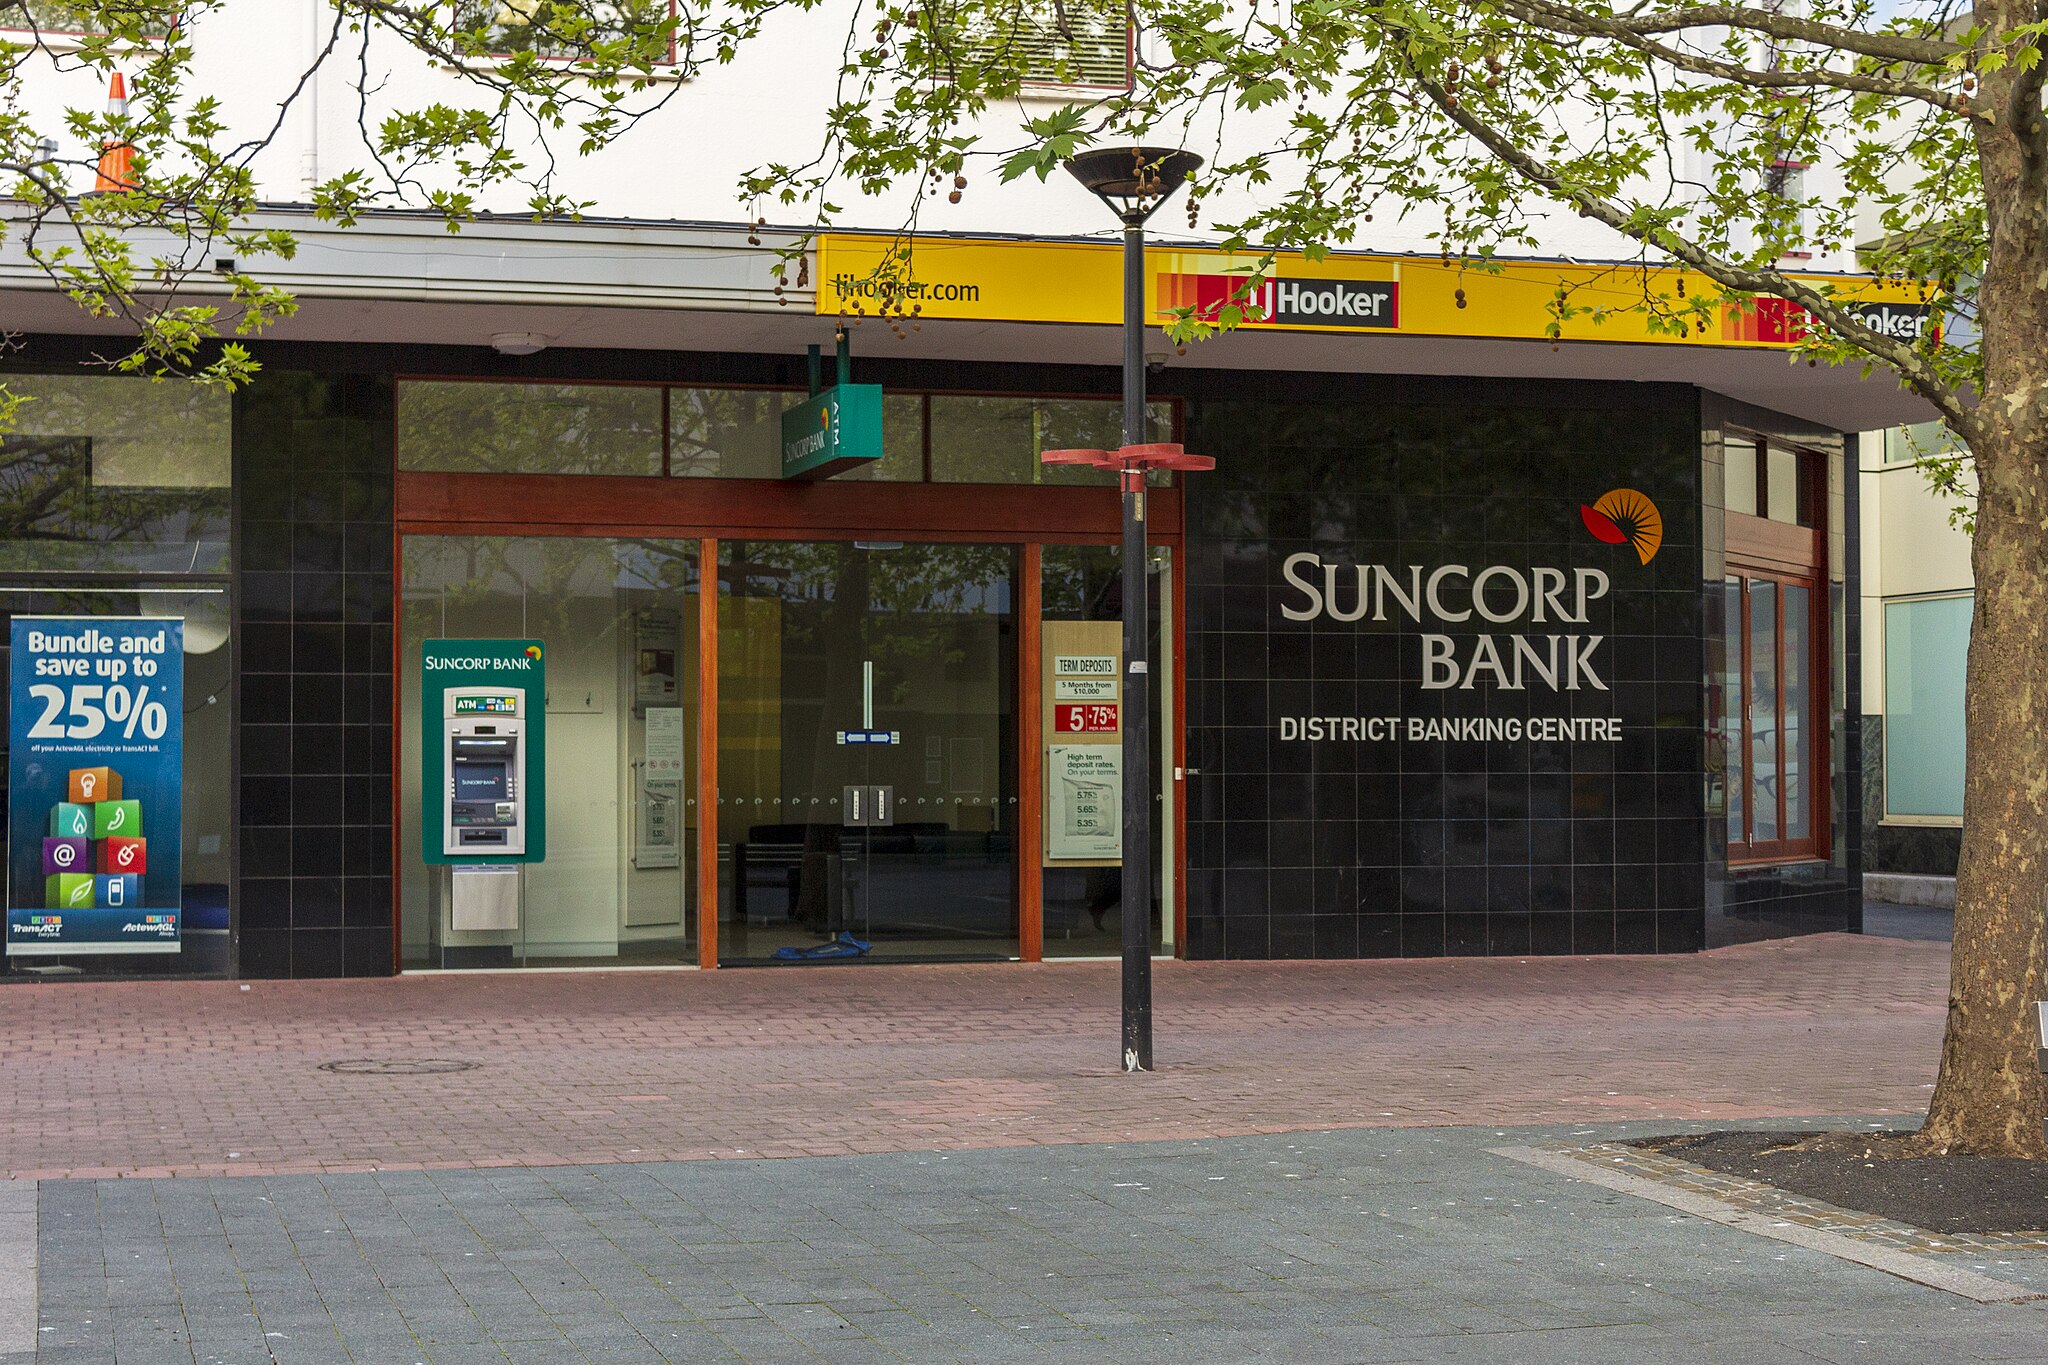 Australia treasurer approves $4.9B ANZ takeover of Suncorp Bank amidst competition concerns